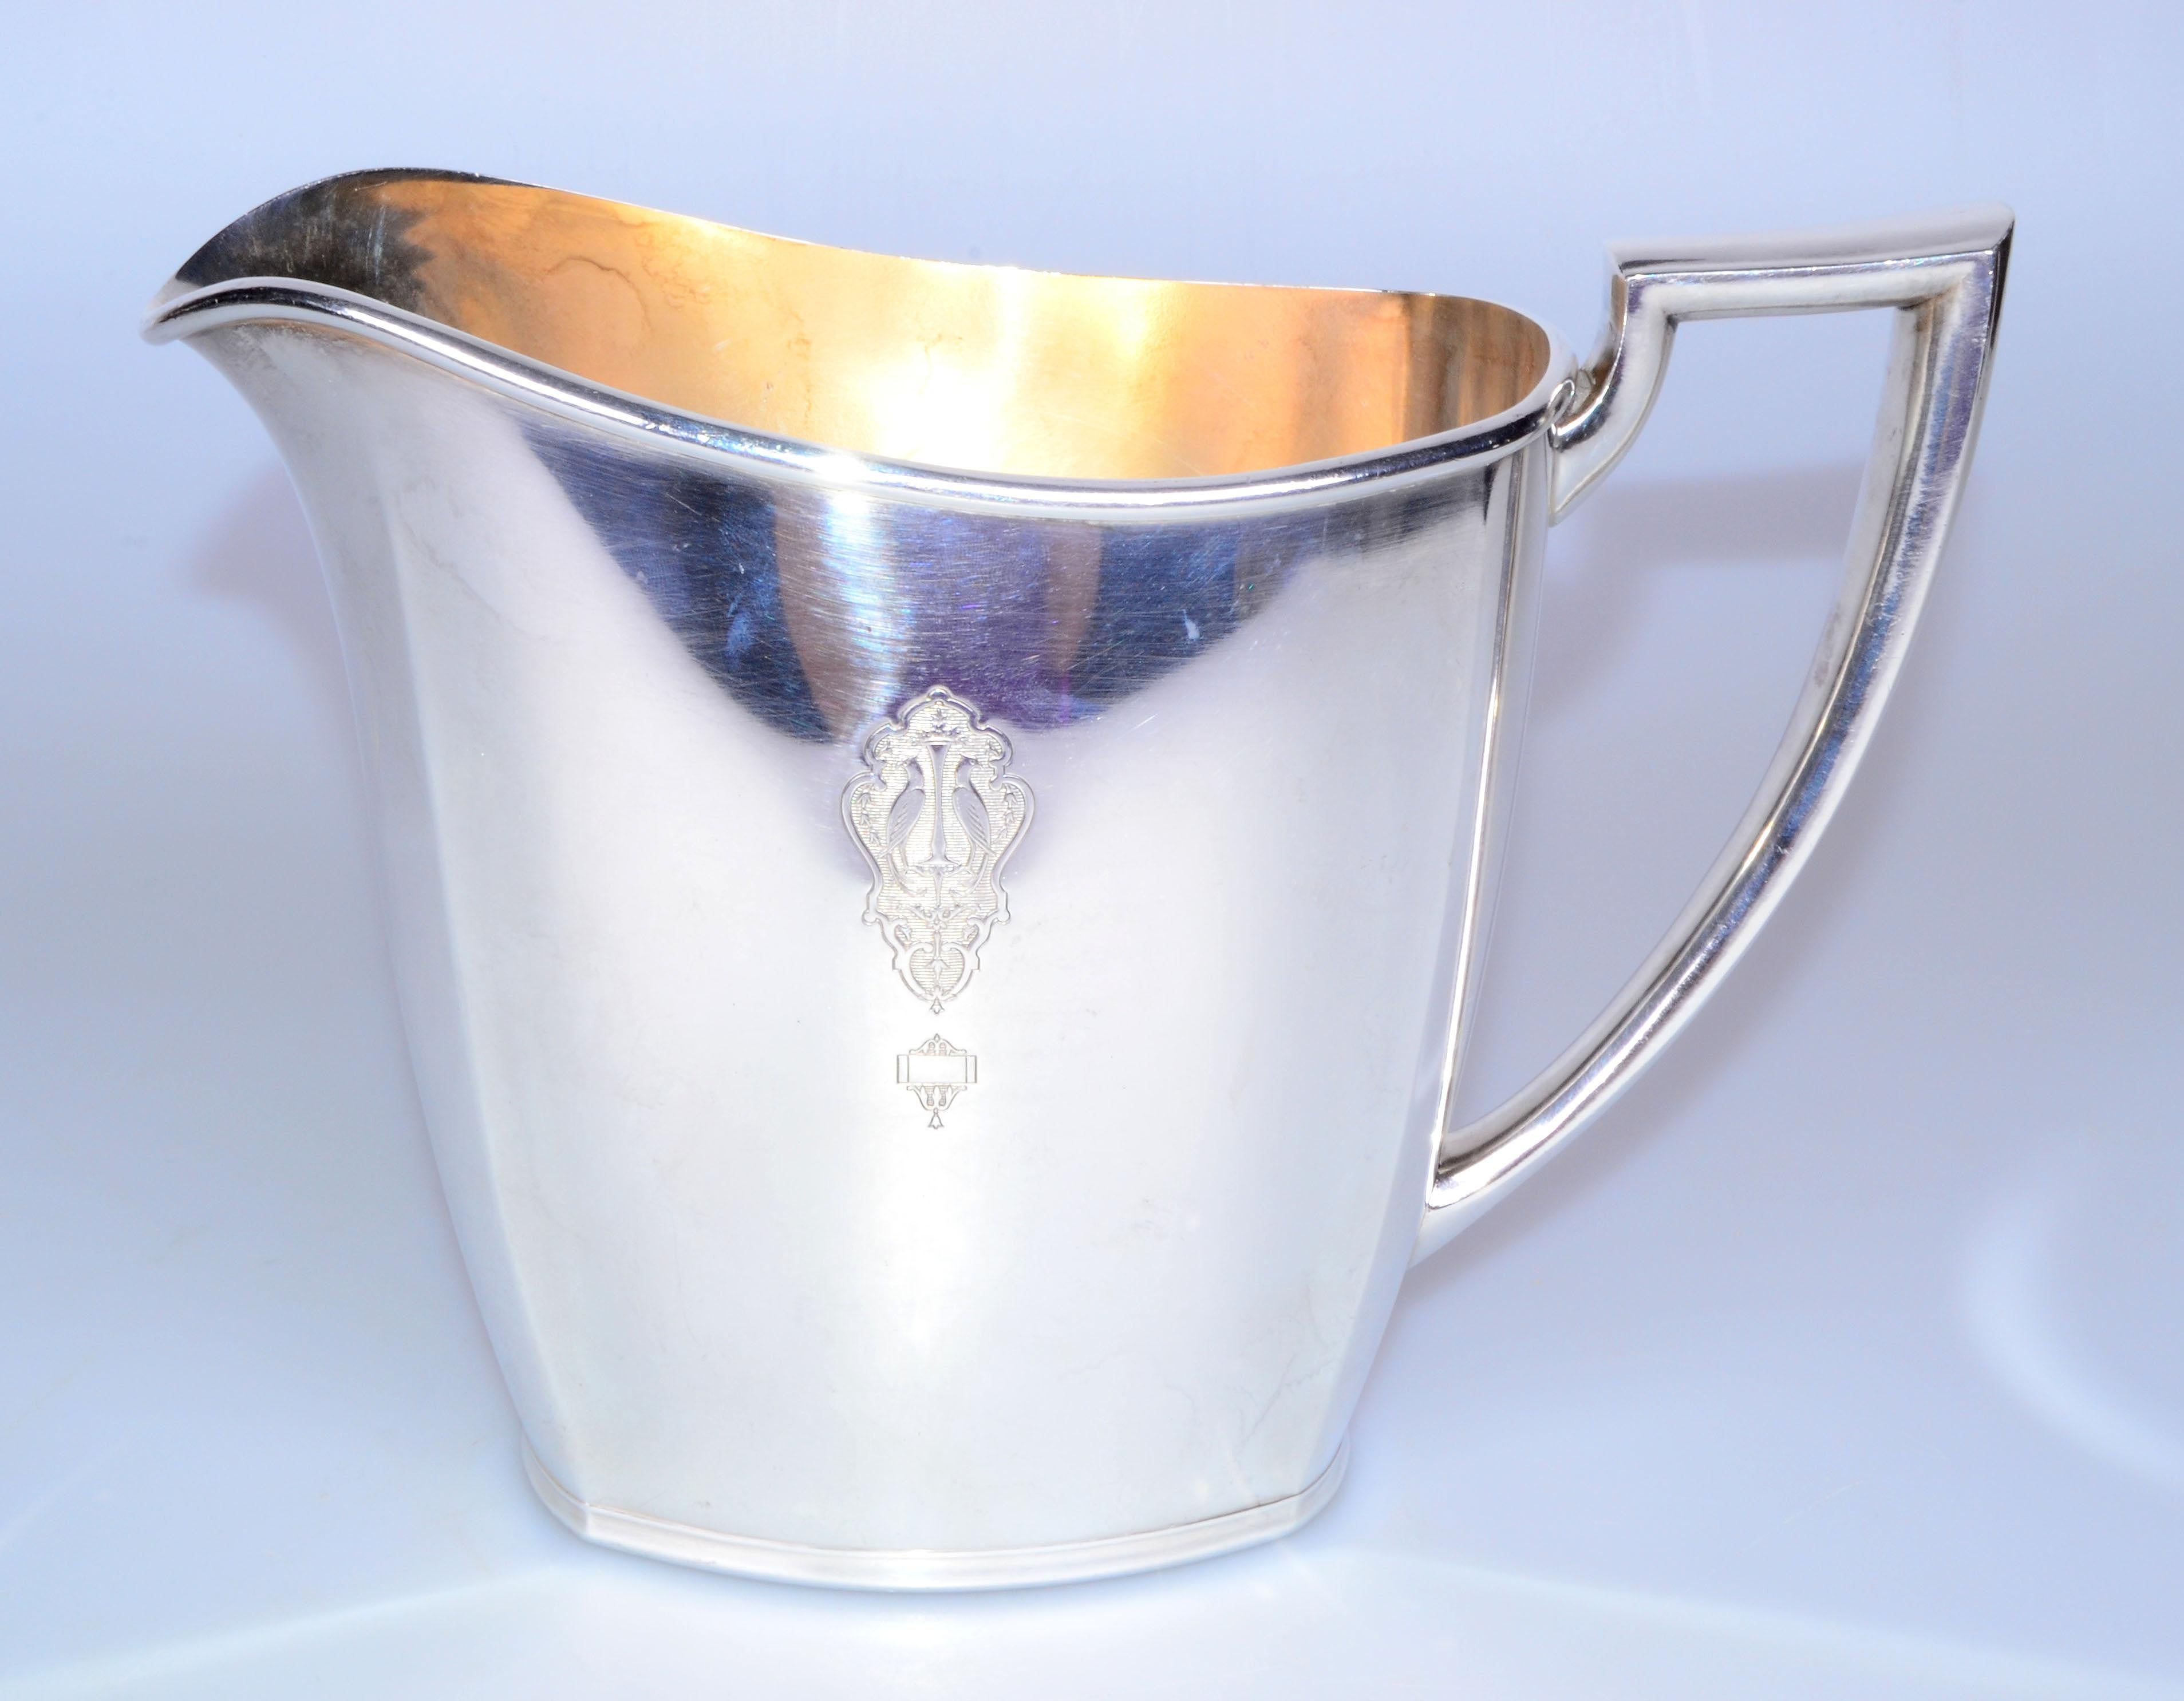 Mid-Century Modern Community plate silver-plated metal water pitcher.
Marked on underside: Community Plate, 12962.